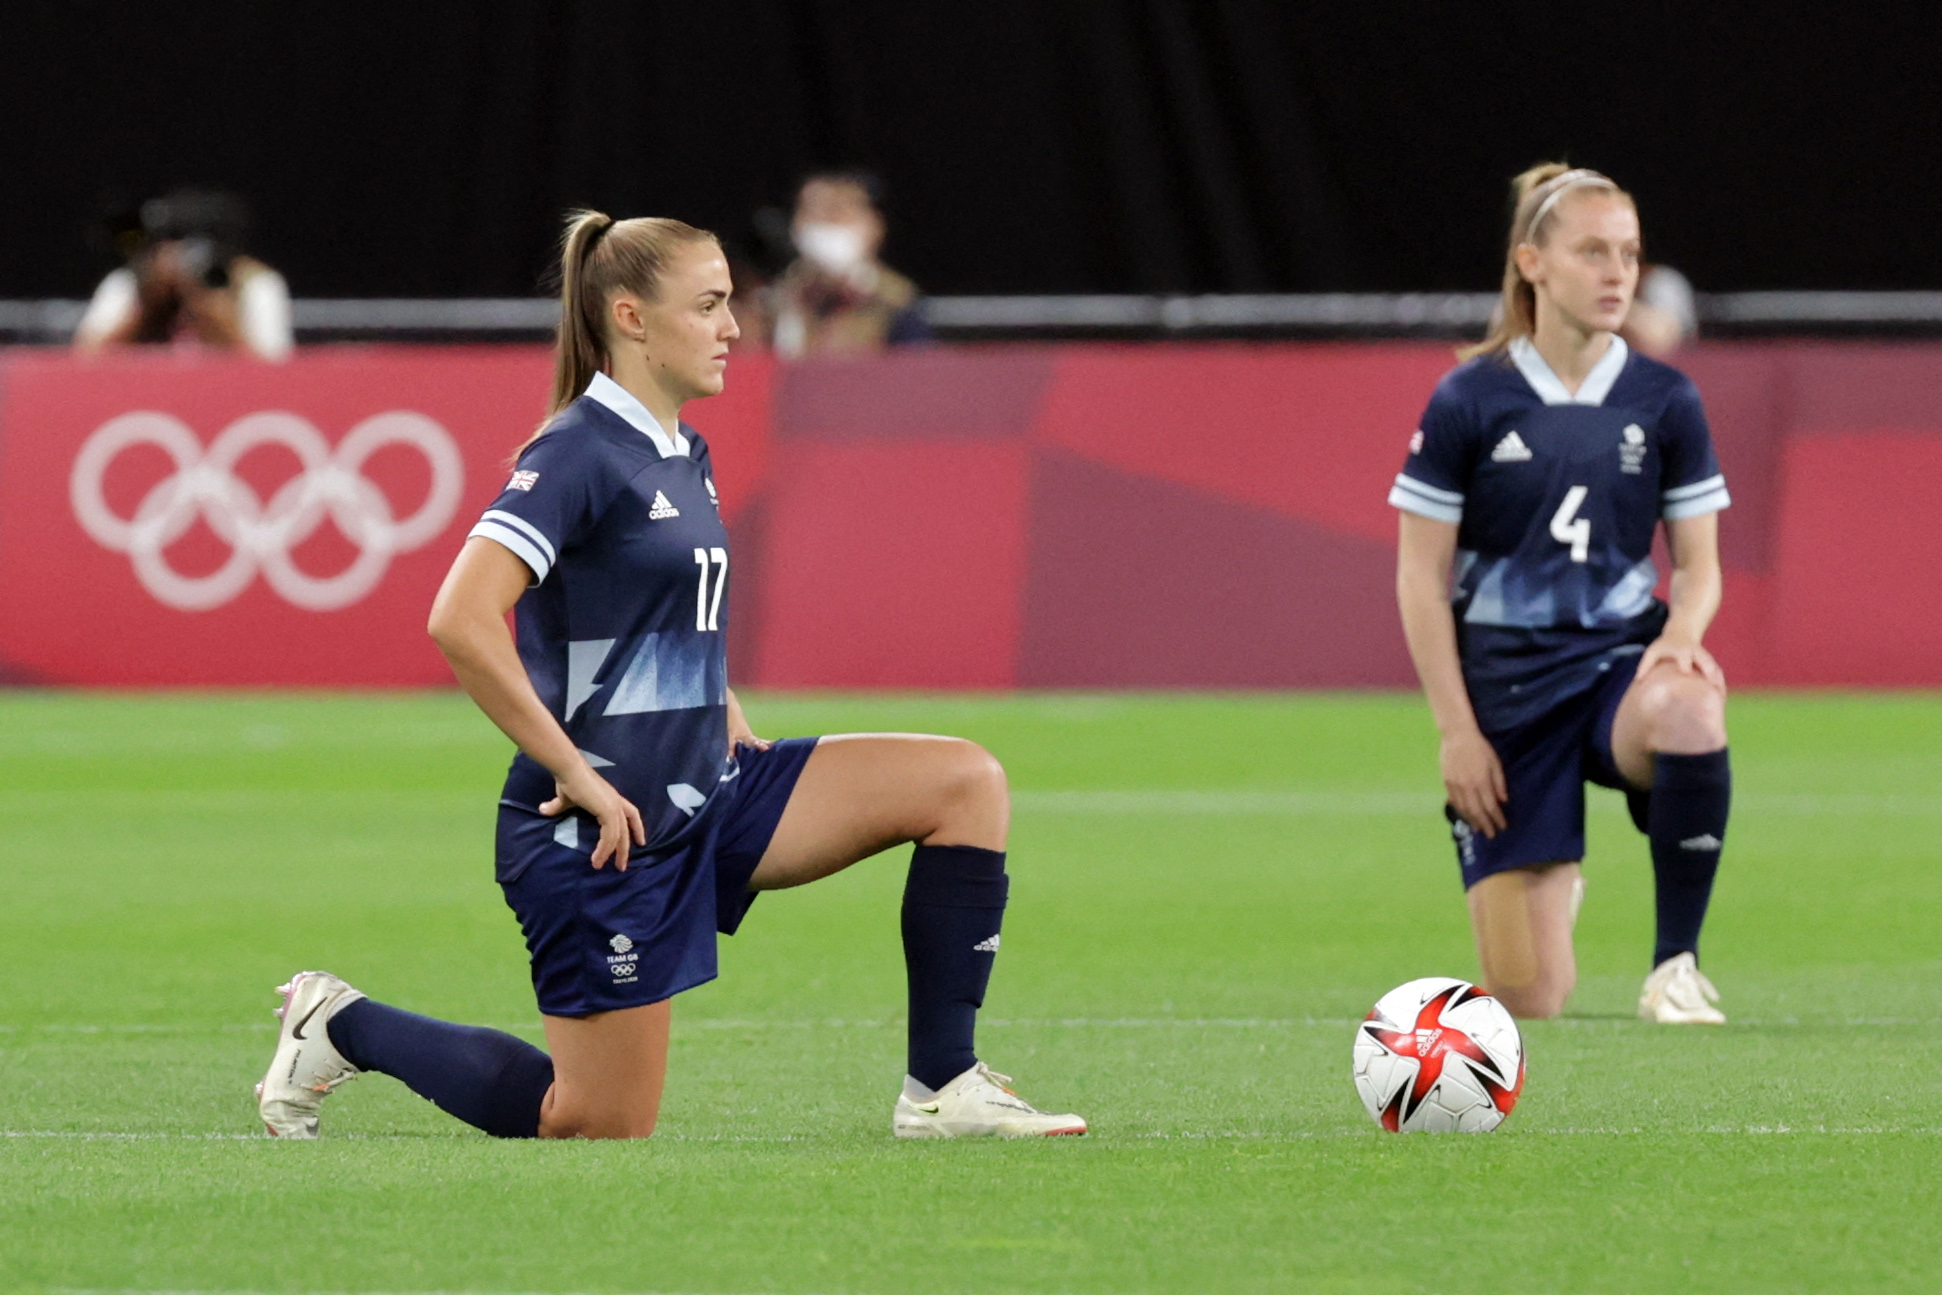 British soccer players Georgia Stanway (left) and Keira Walsh take a knee before a first round Olympic soccer match at the Sapporo Dome in Sapporo on Wednesday. Photo: ASANO IKKO / AFP